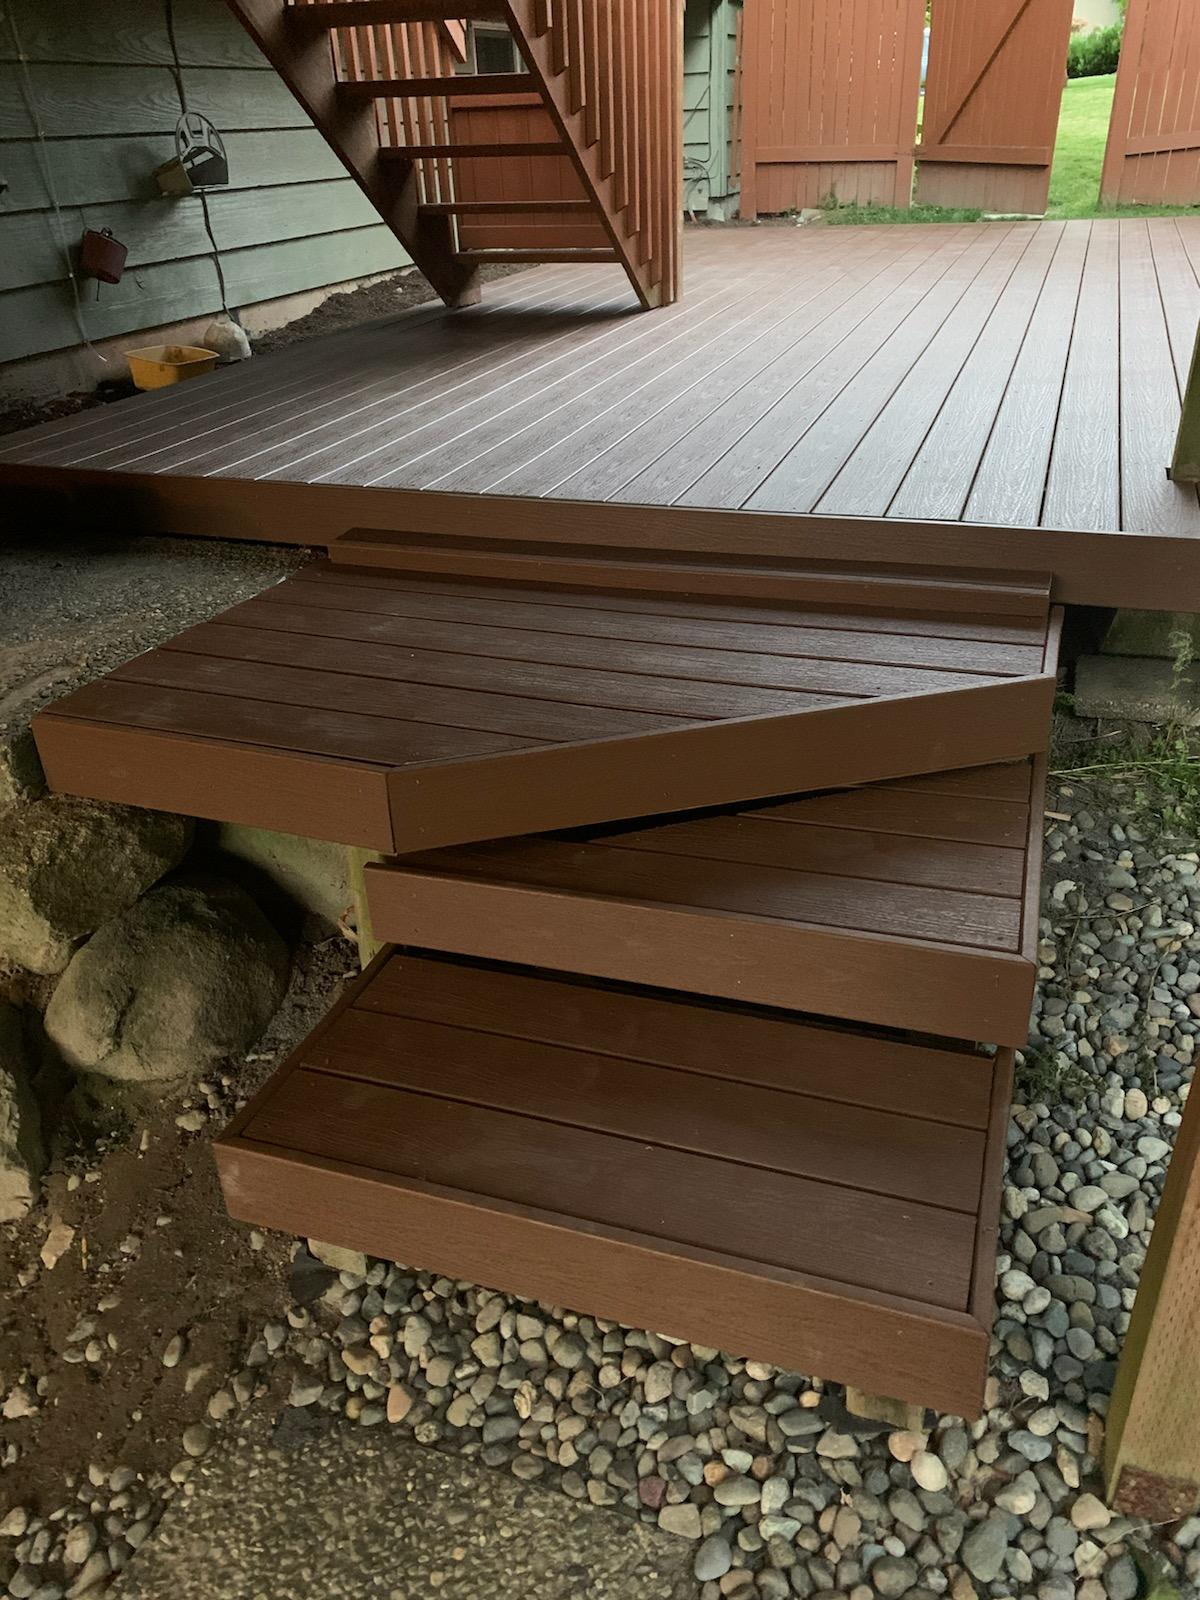 Replacing the deck floor with composite wood